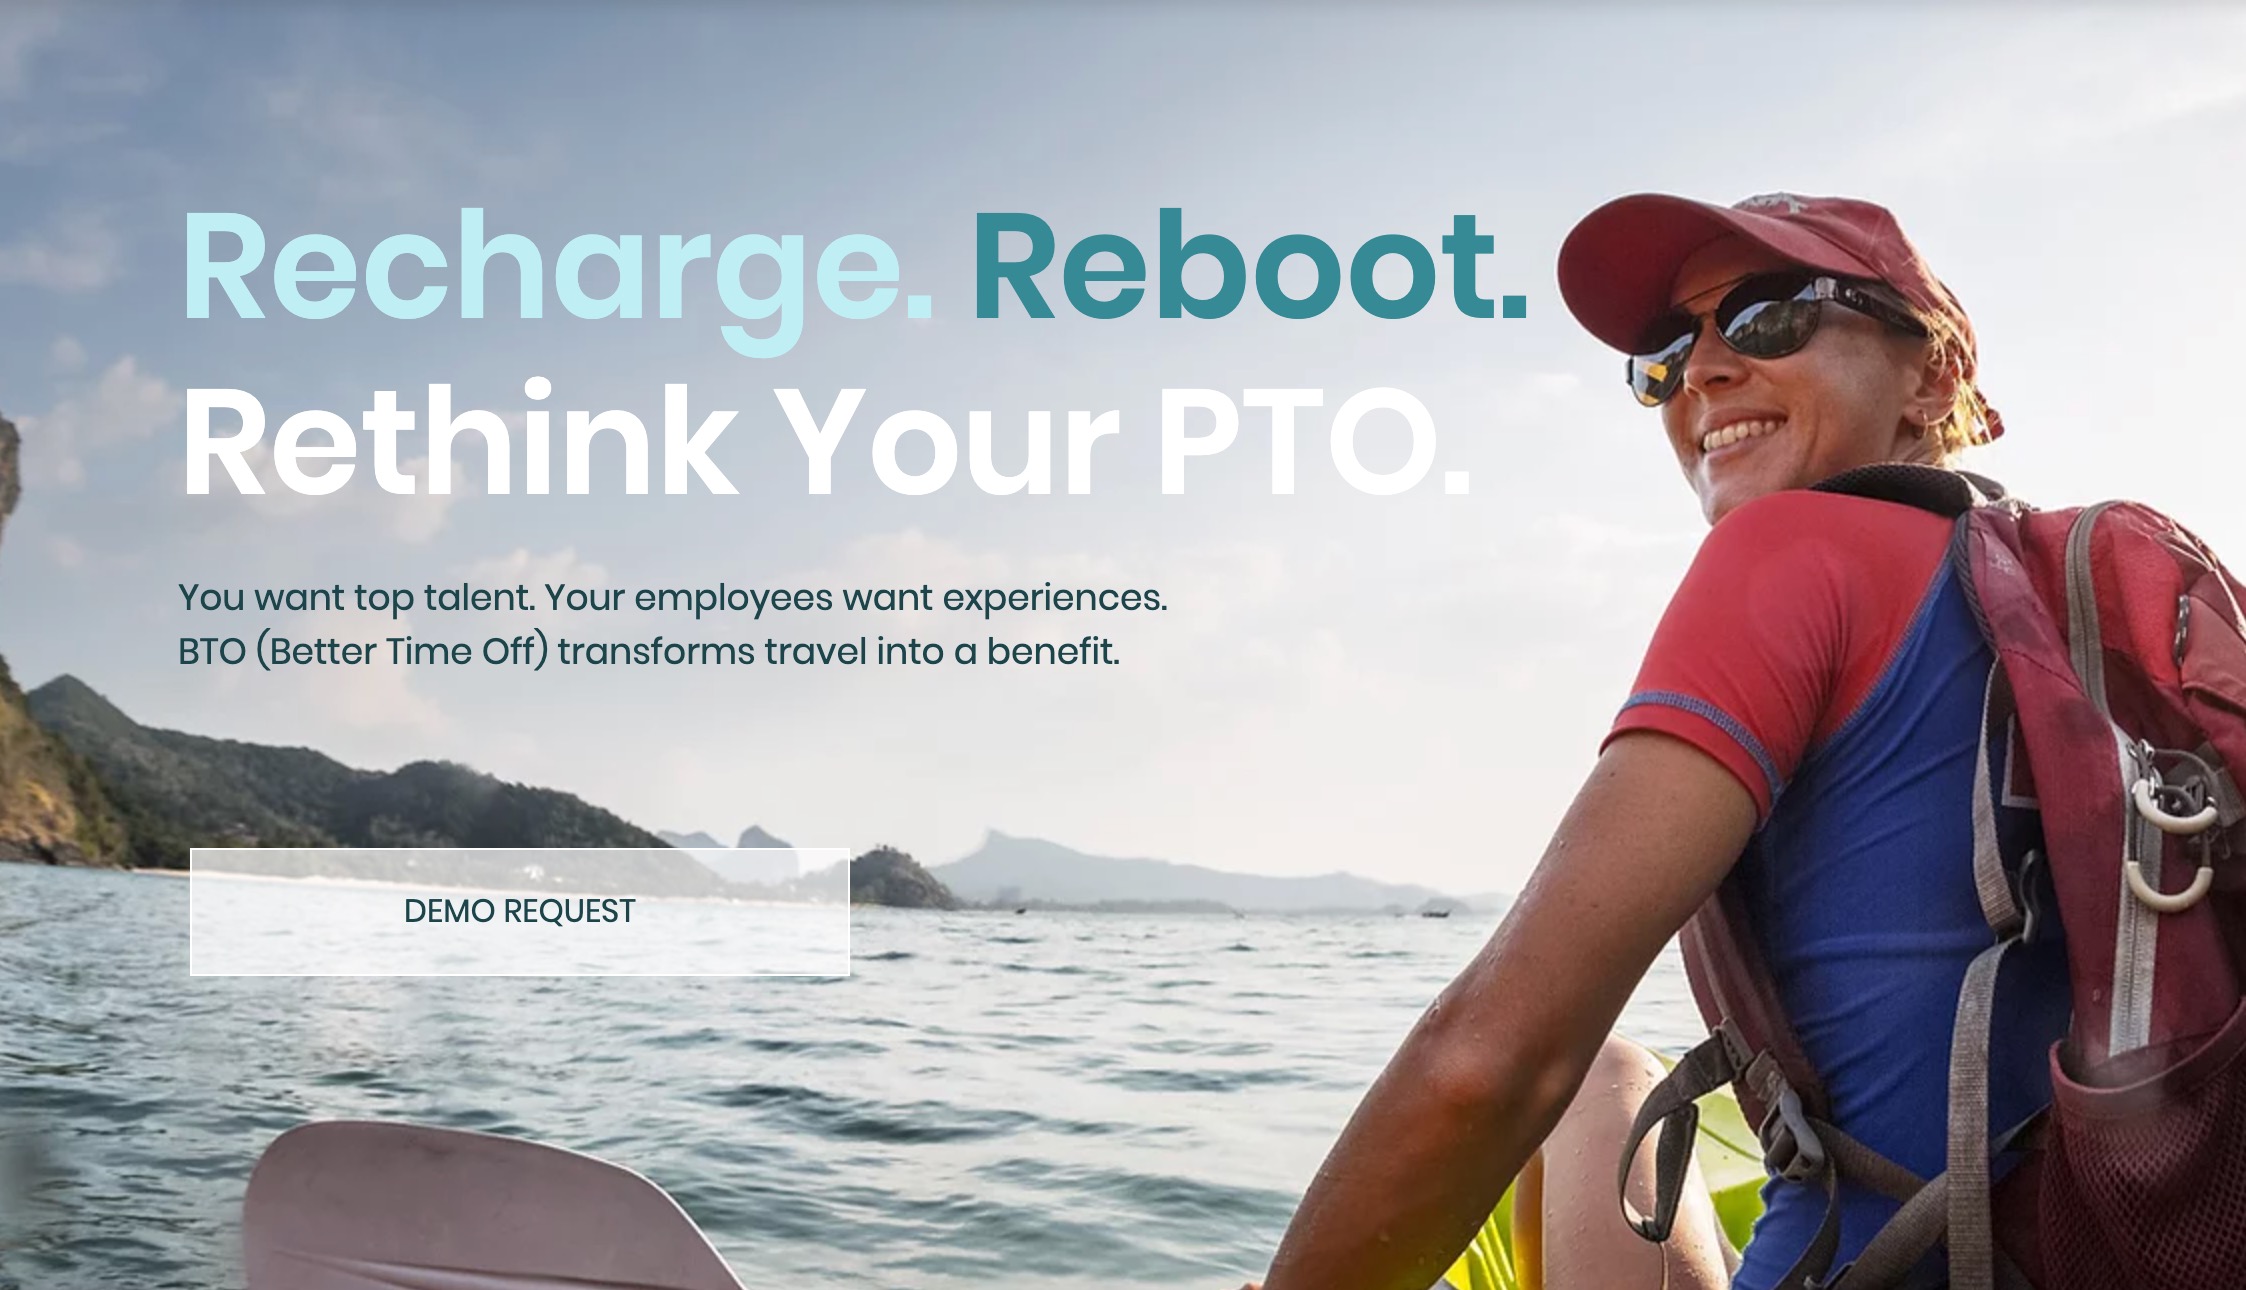 BTO (Better Time Off) Shakes up Traditional PTO Plans and Offers Experiences with Company Matched Savings and Travel as a Benefit Programs